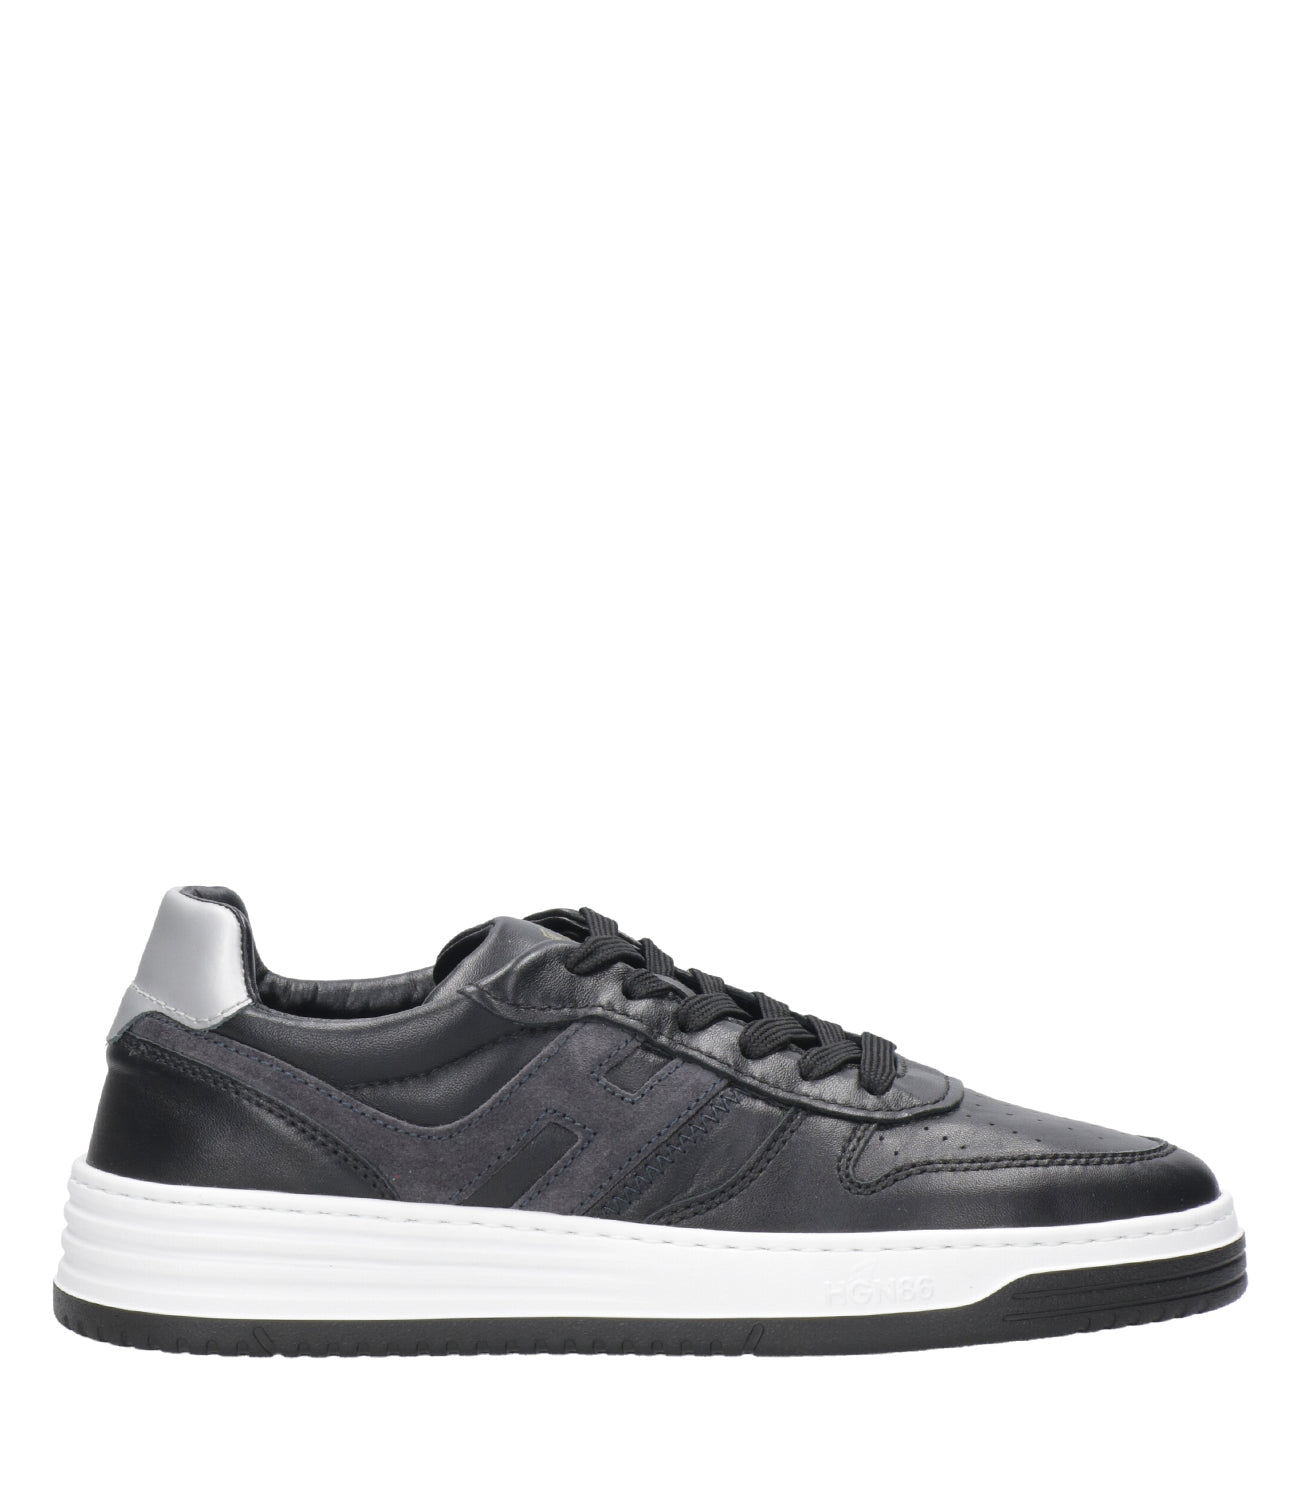 Hogan | Sneakers H580 Lace-up Black and White